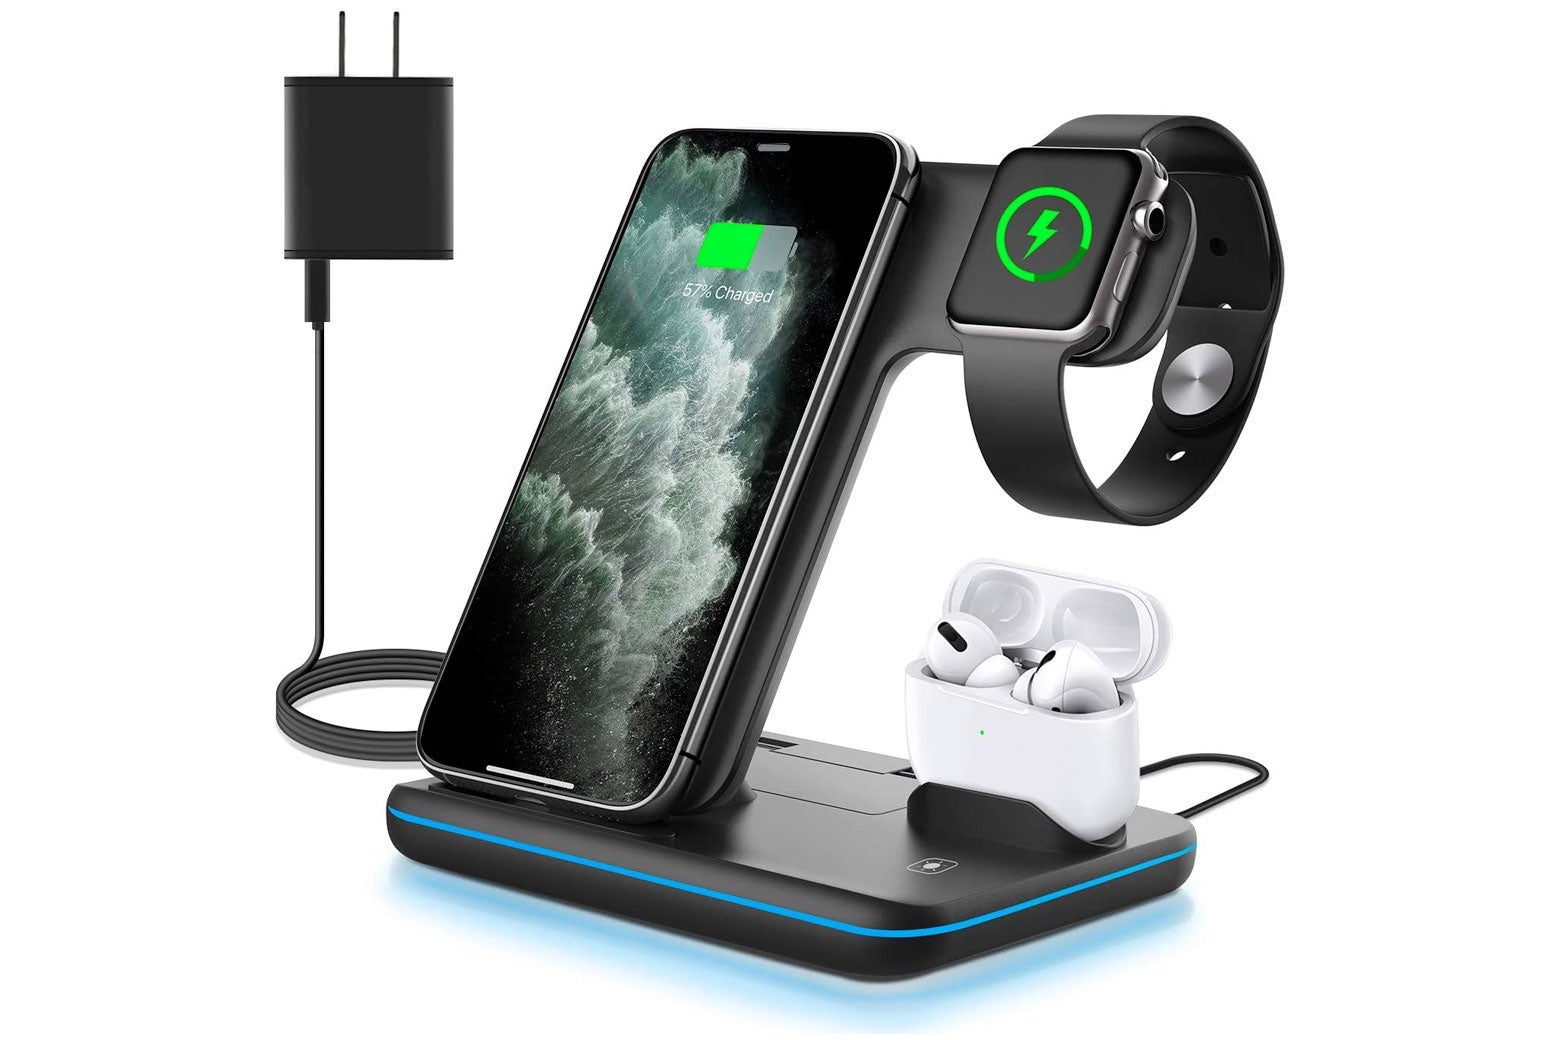 Charging stand with iPhone, Apple Watch, and AirPods docked in it